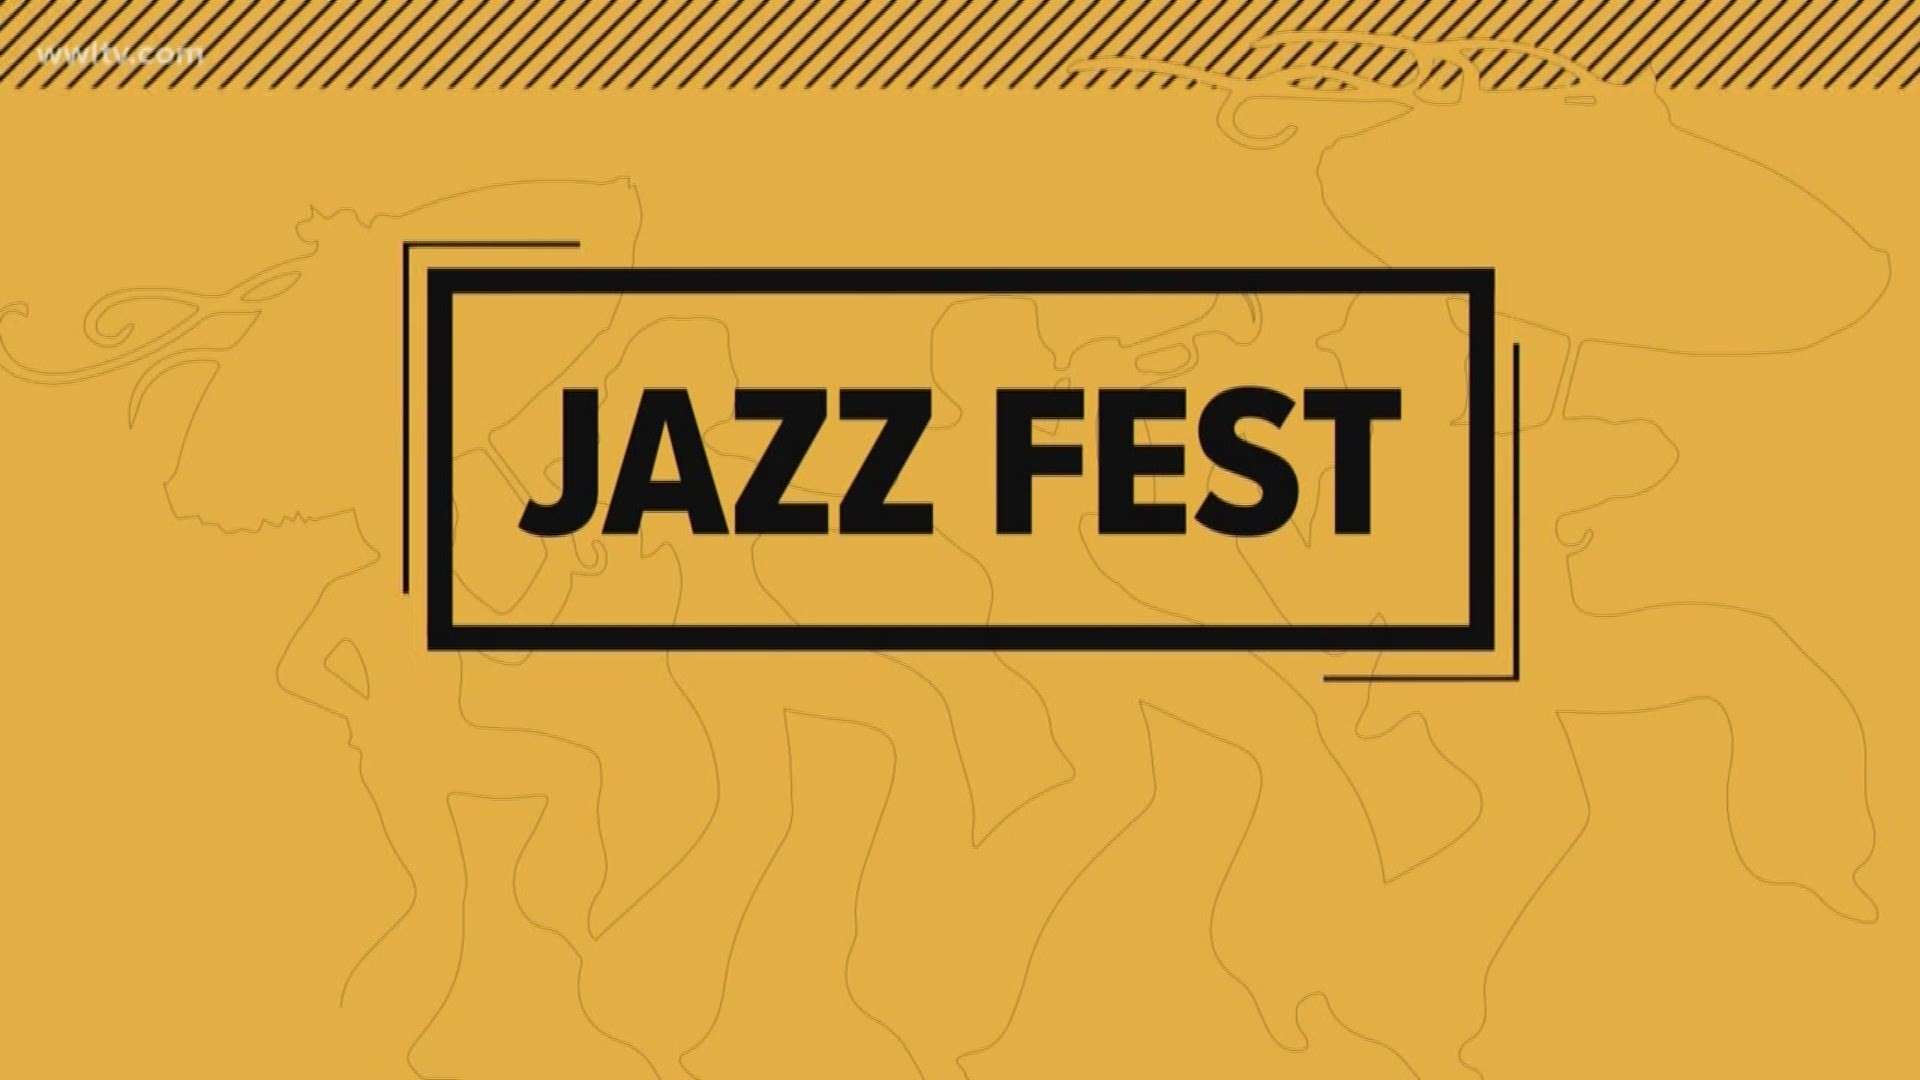 New Orleans Advocate Music Writer Keith Spera talks about the lineup for the 50th Annual Jazz and Heritage Festival.